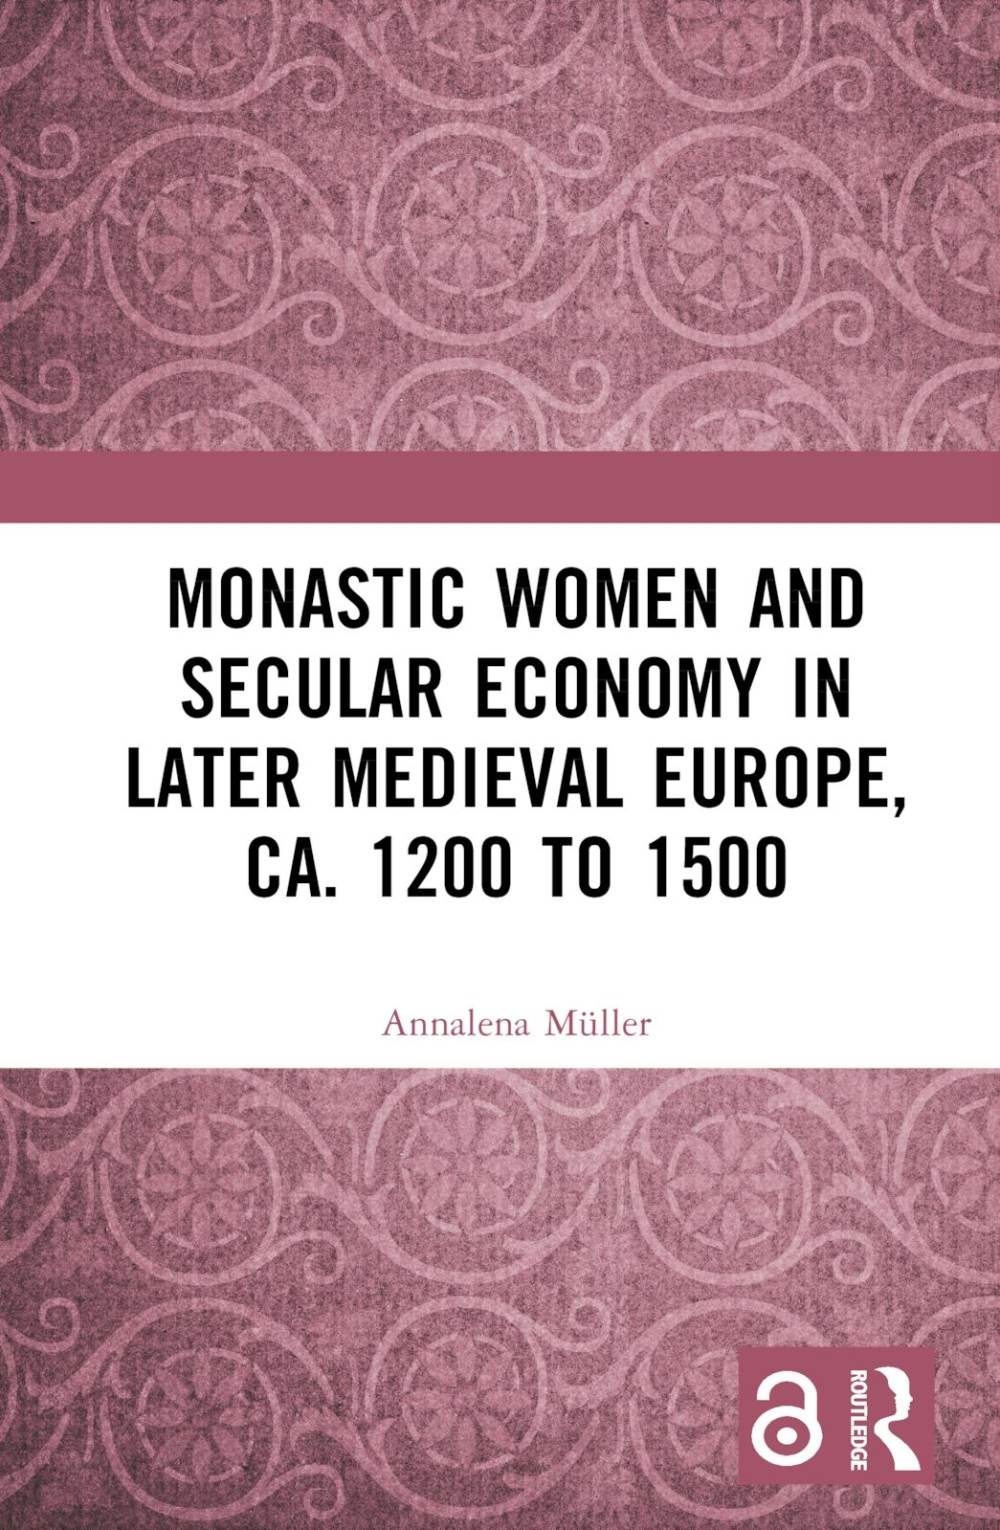 Monastic Women and Secular Economy in Later Medieval Europe, Ca. 1200 to 1500